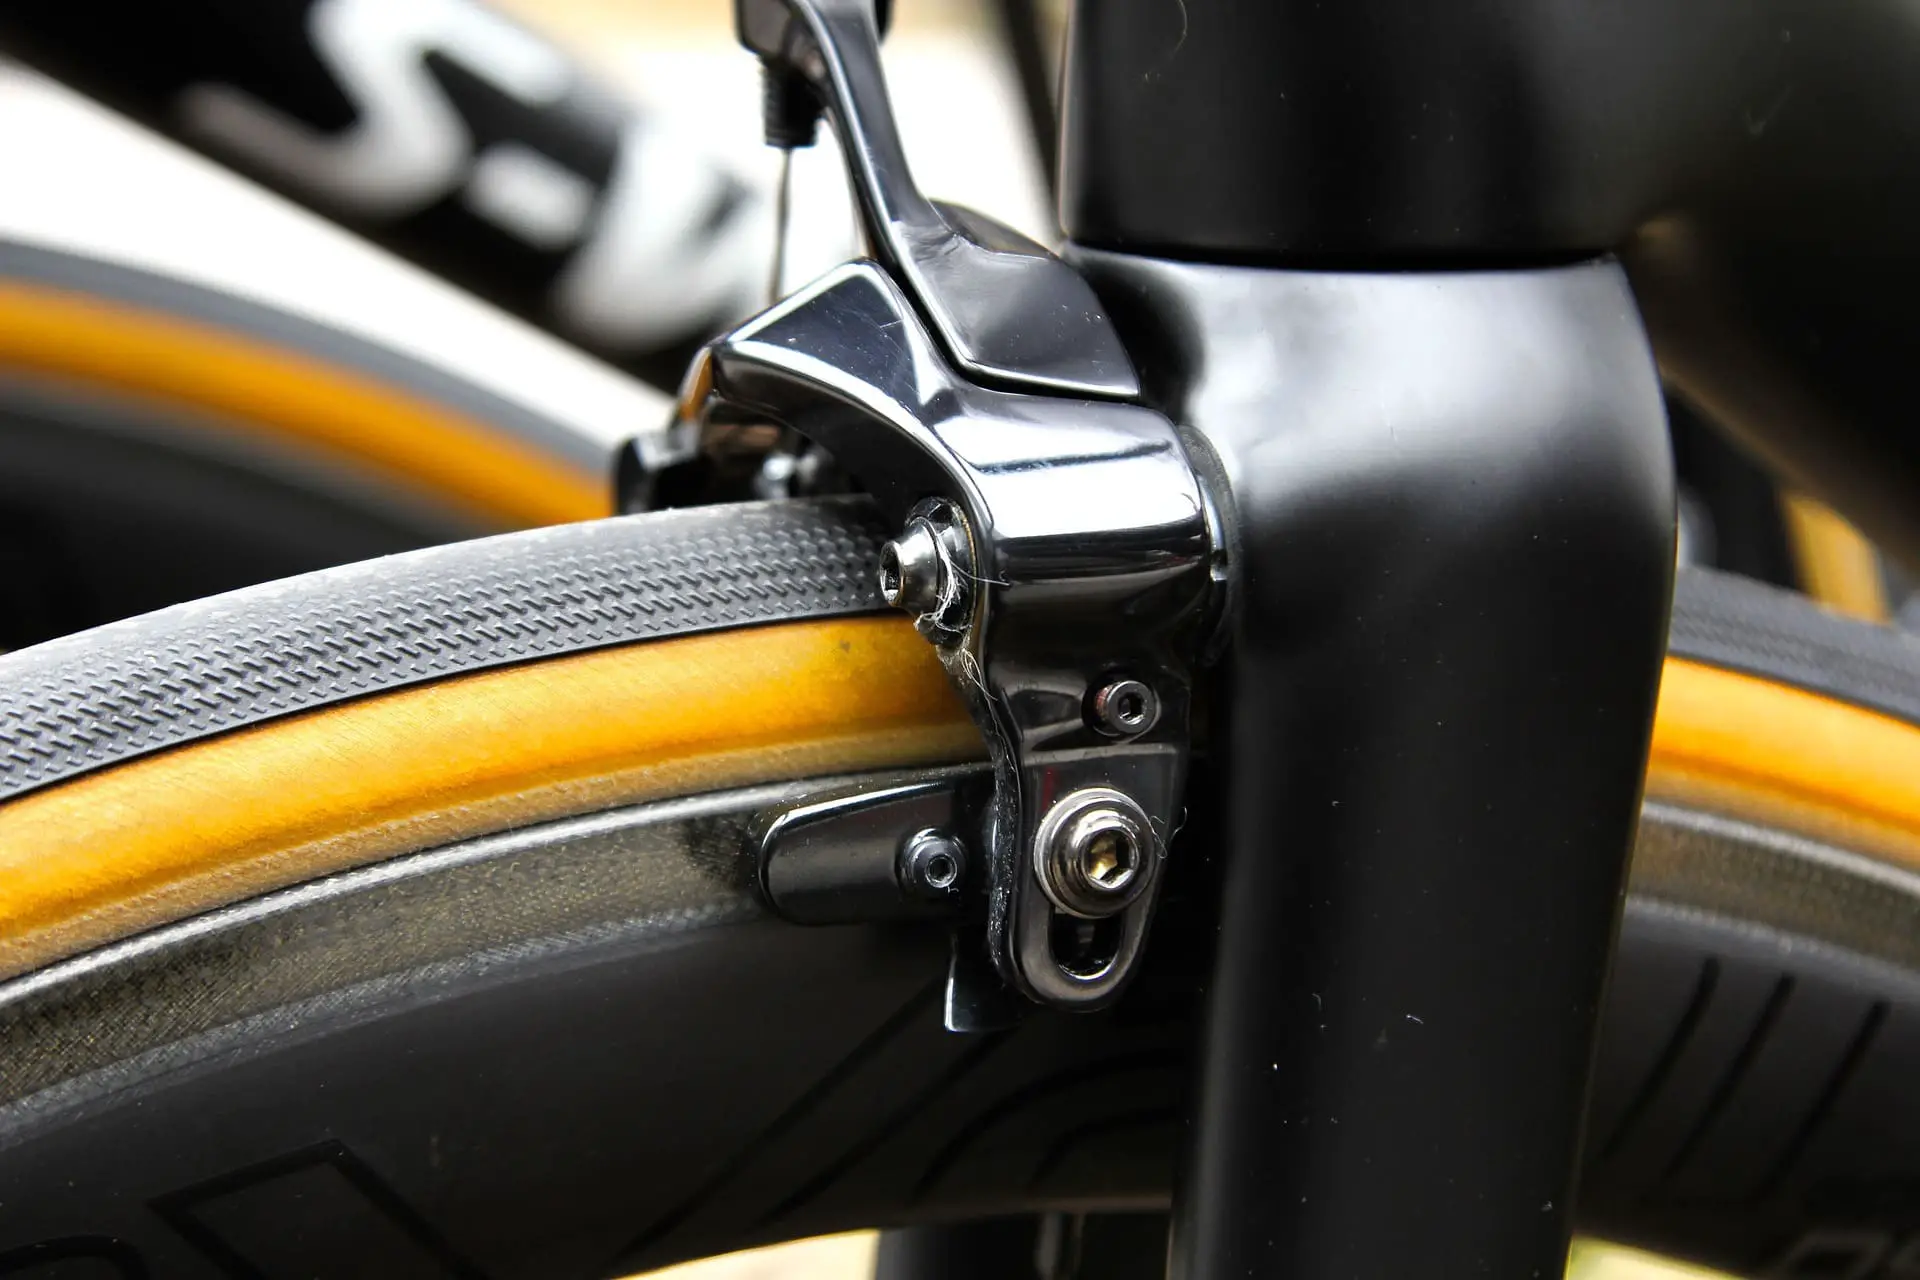 The Best Brake Pads For Bikes You Should Have: Buyers' Guide